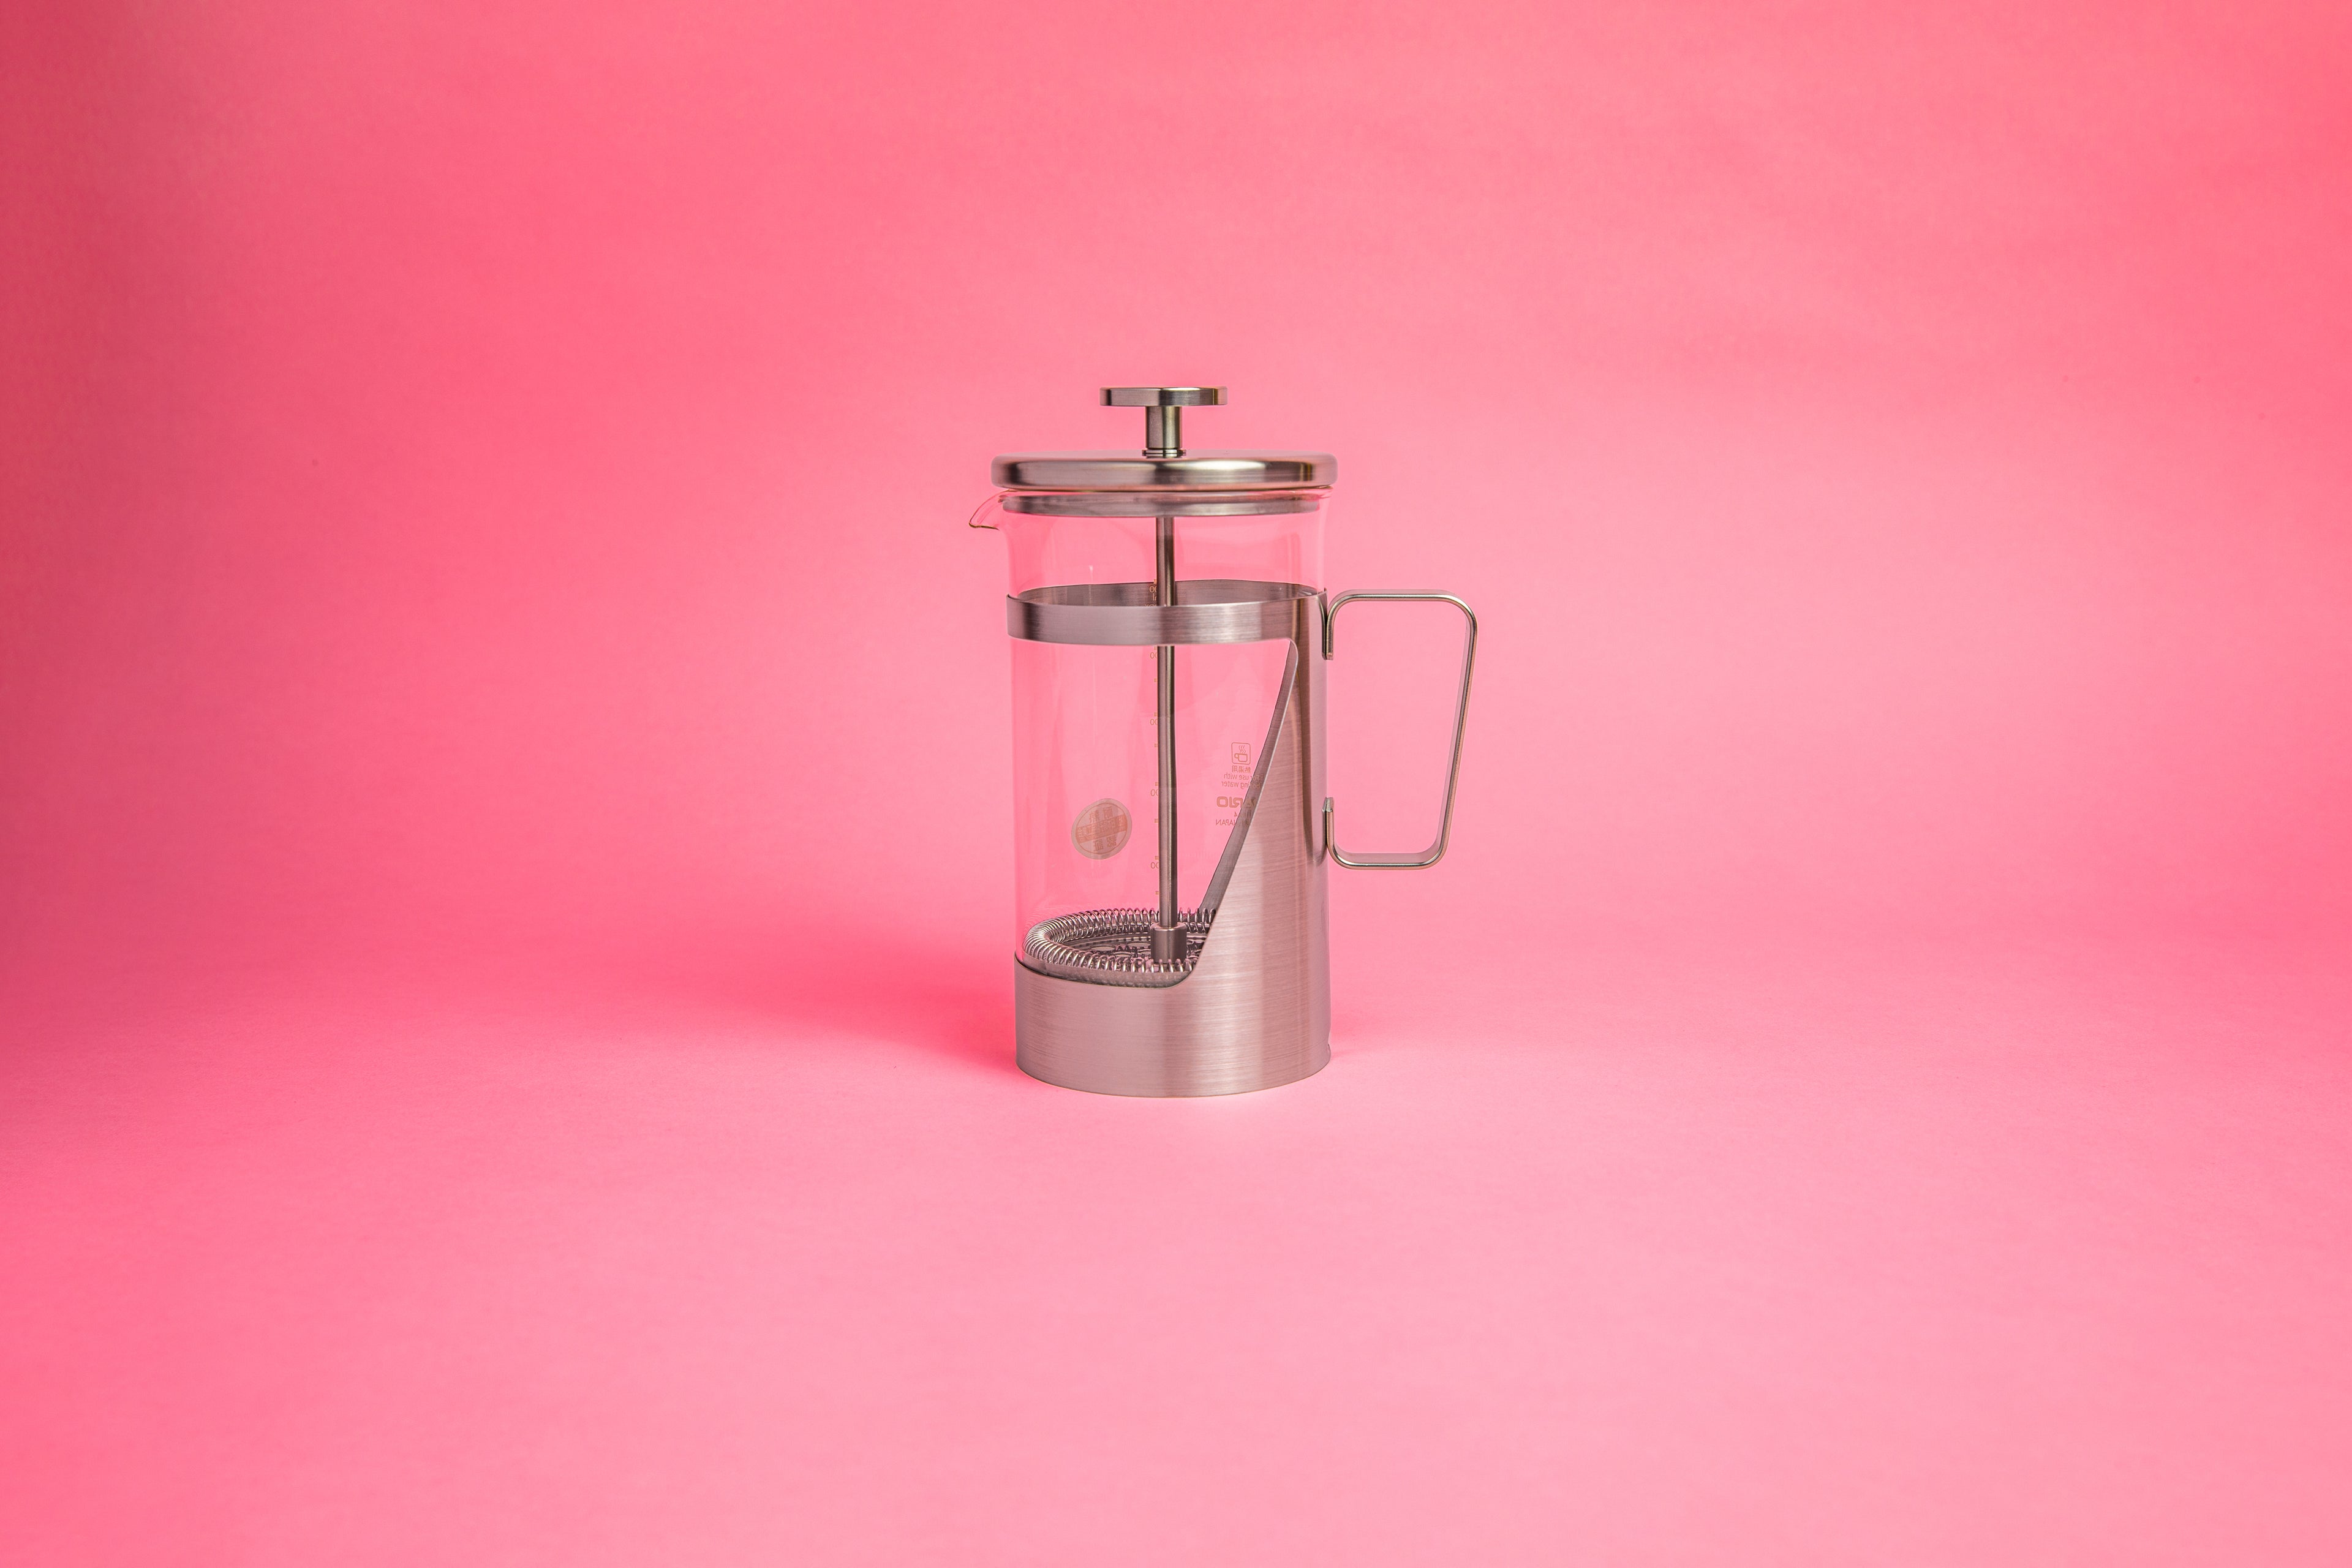 Coffee press featuring a glass pitcher with fluted spout, stainless steel mesh filter with pole, and a stainless steel lid, knob, holder, and handle. Set against a pink background.